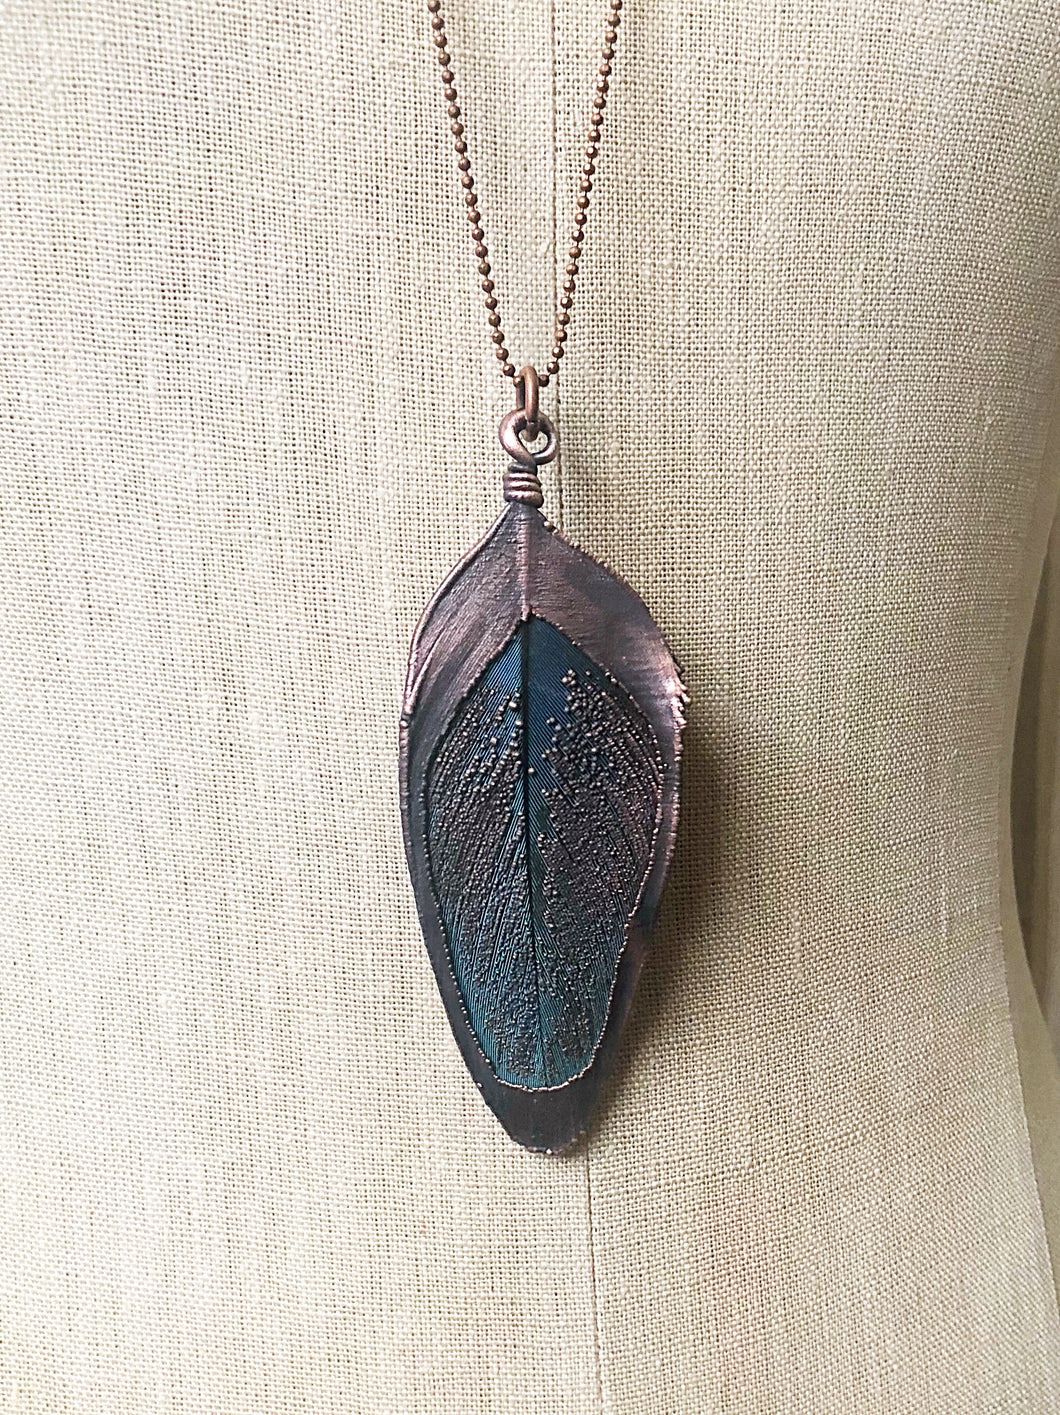 Blue Macaw Feather Necklace - Ready to Ship